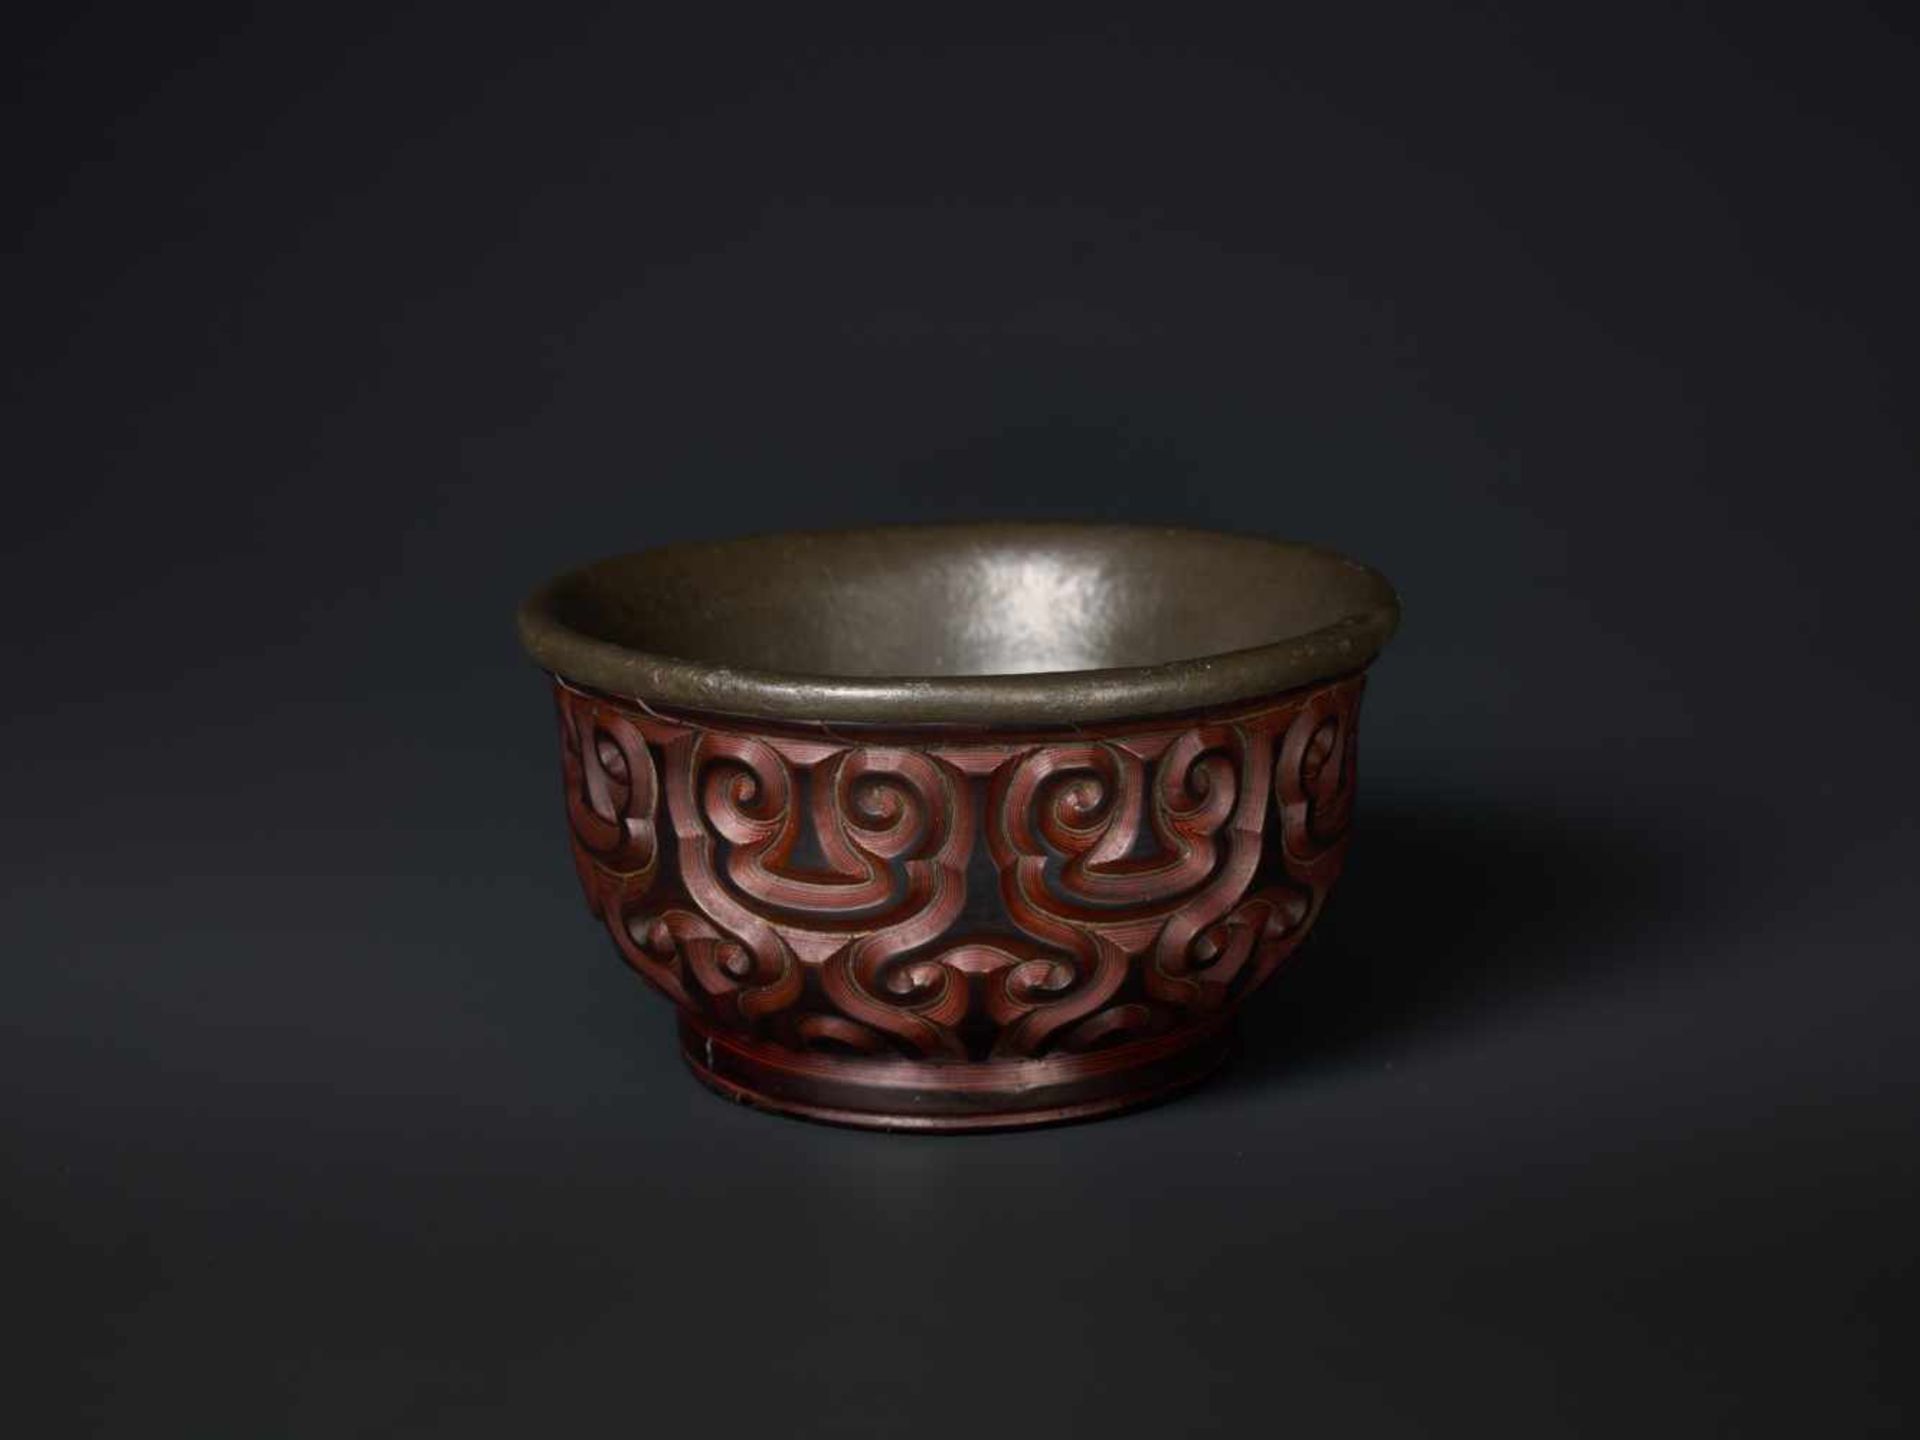 A SONG DYNASTY TIXI LACQUER BOWL WITH PEWTER LINING Multi-layered lacquer, interior lined with - Image 3 of 7